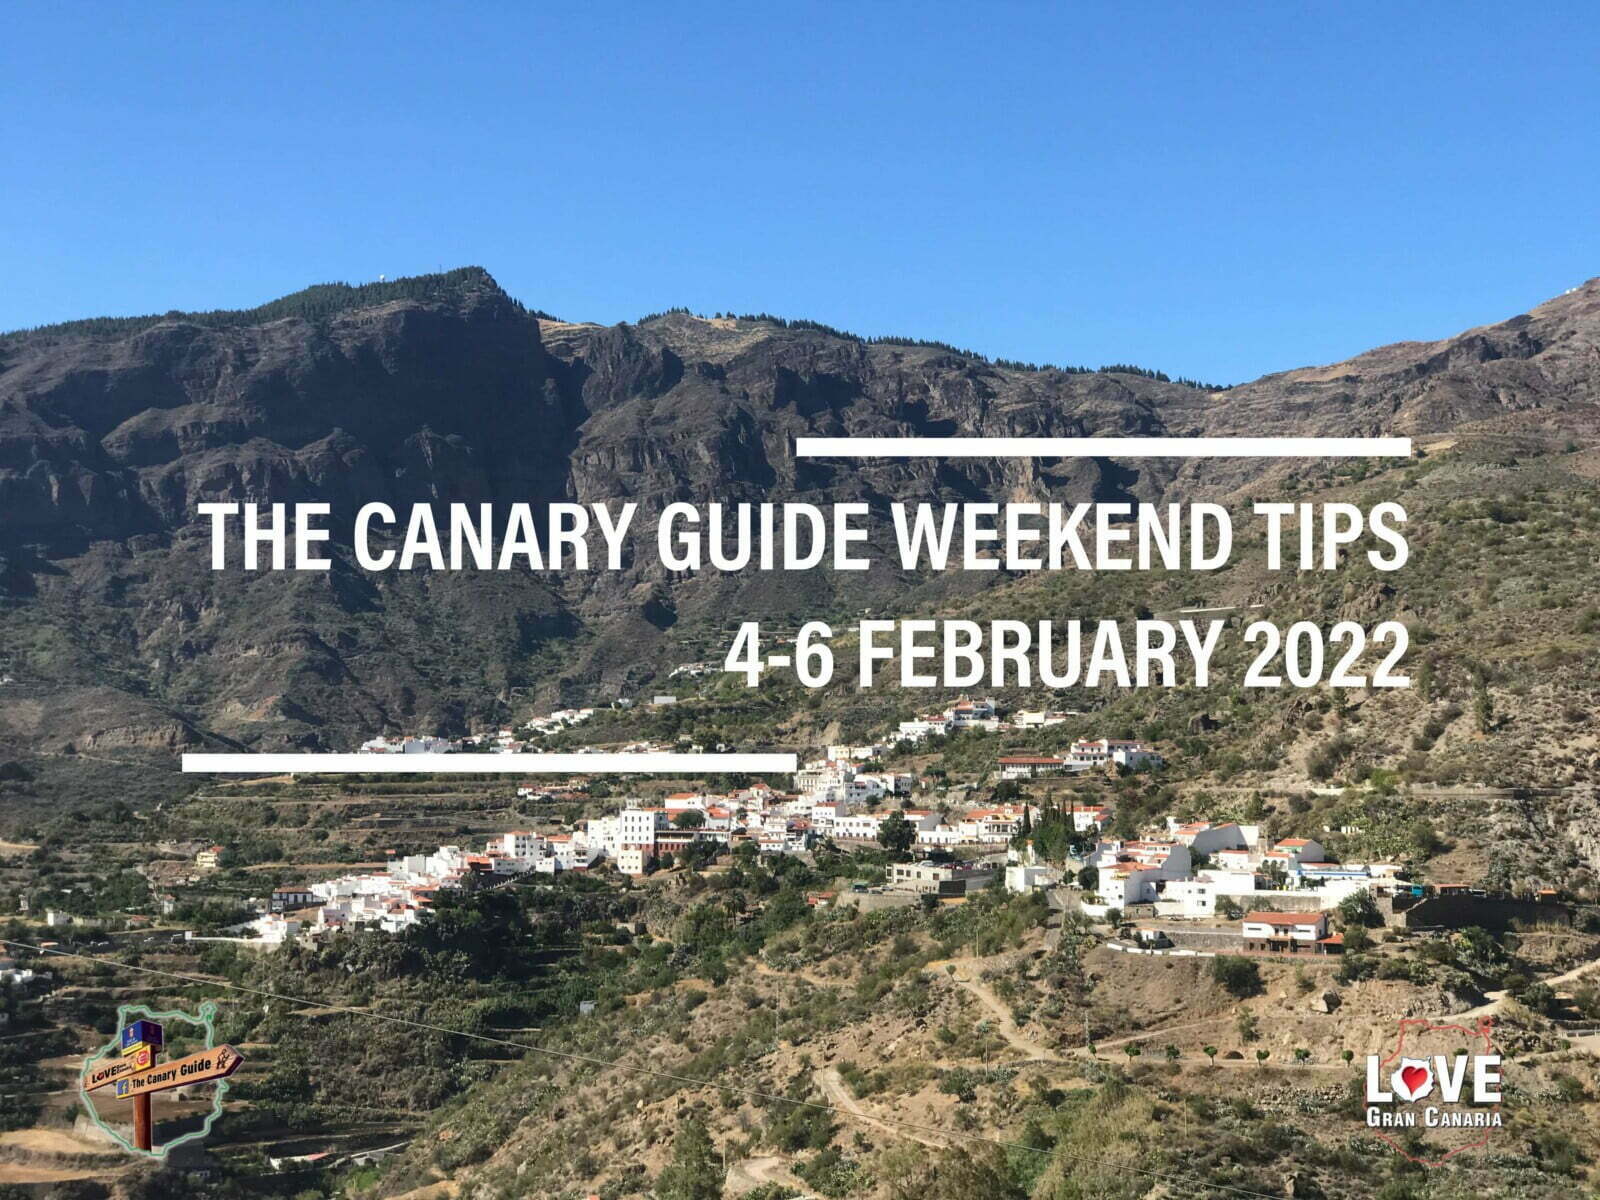 The Canary Guide #WeekendTips 4-6 February 2022